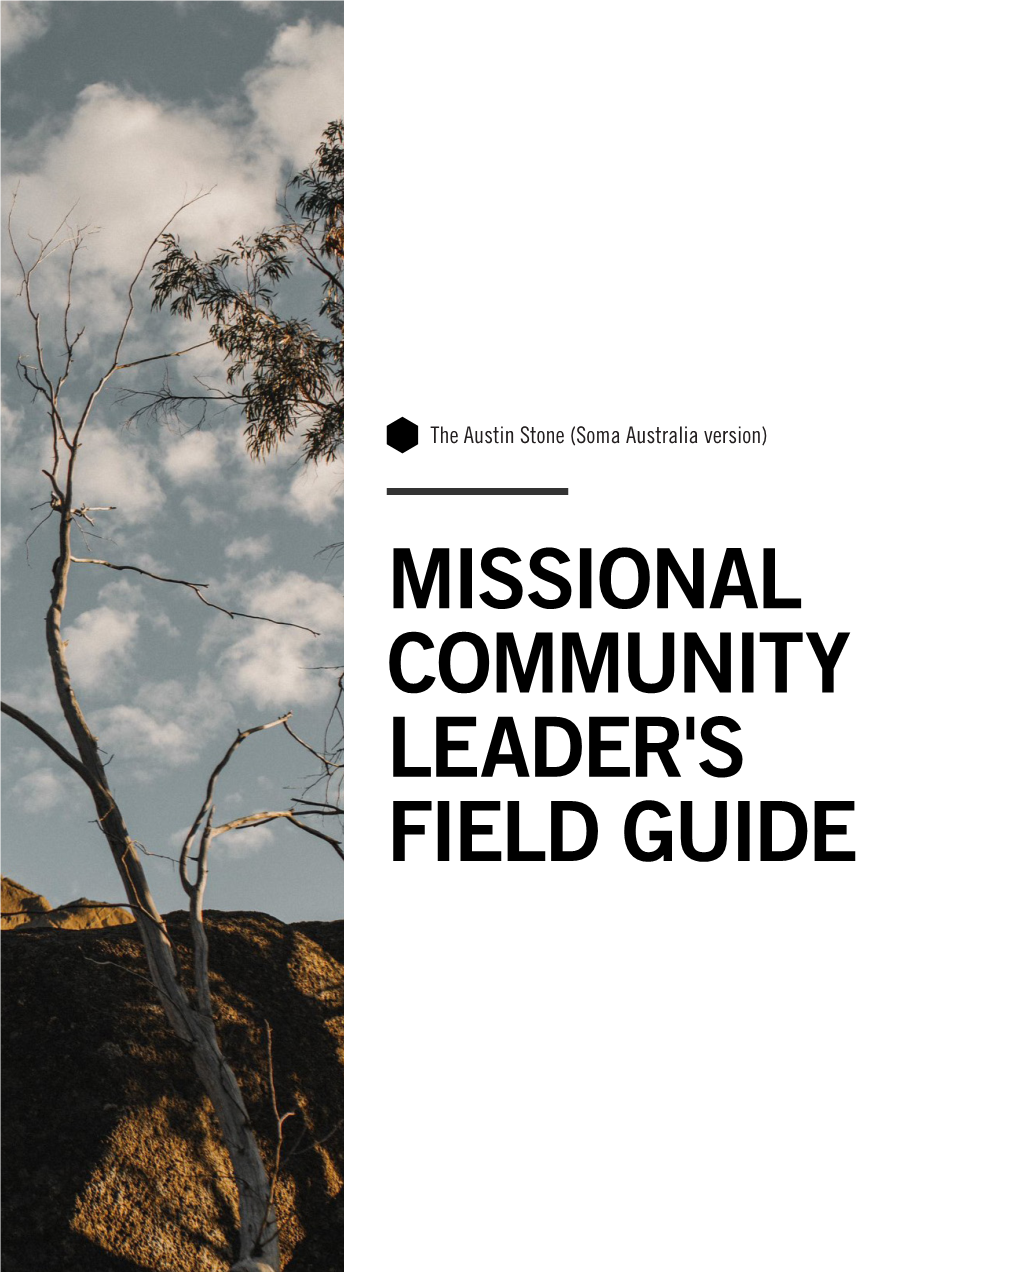 MISSIONAL COMMUNITY LEADER's FIELD GUIDE Unless Otherwise Speciﬁed, All Scripture Quotations Are Taken from the English Standard Version